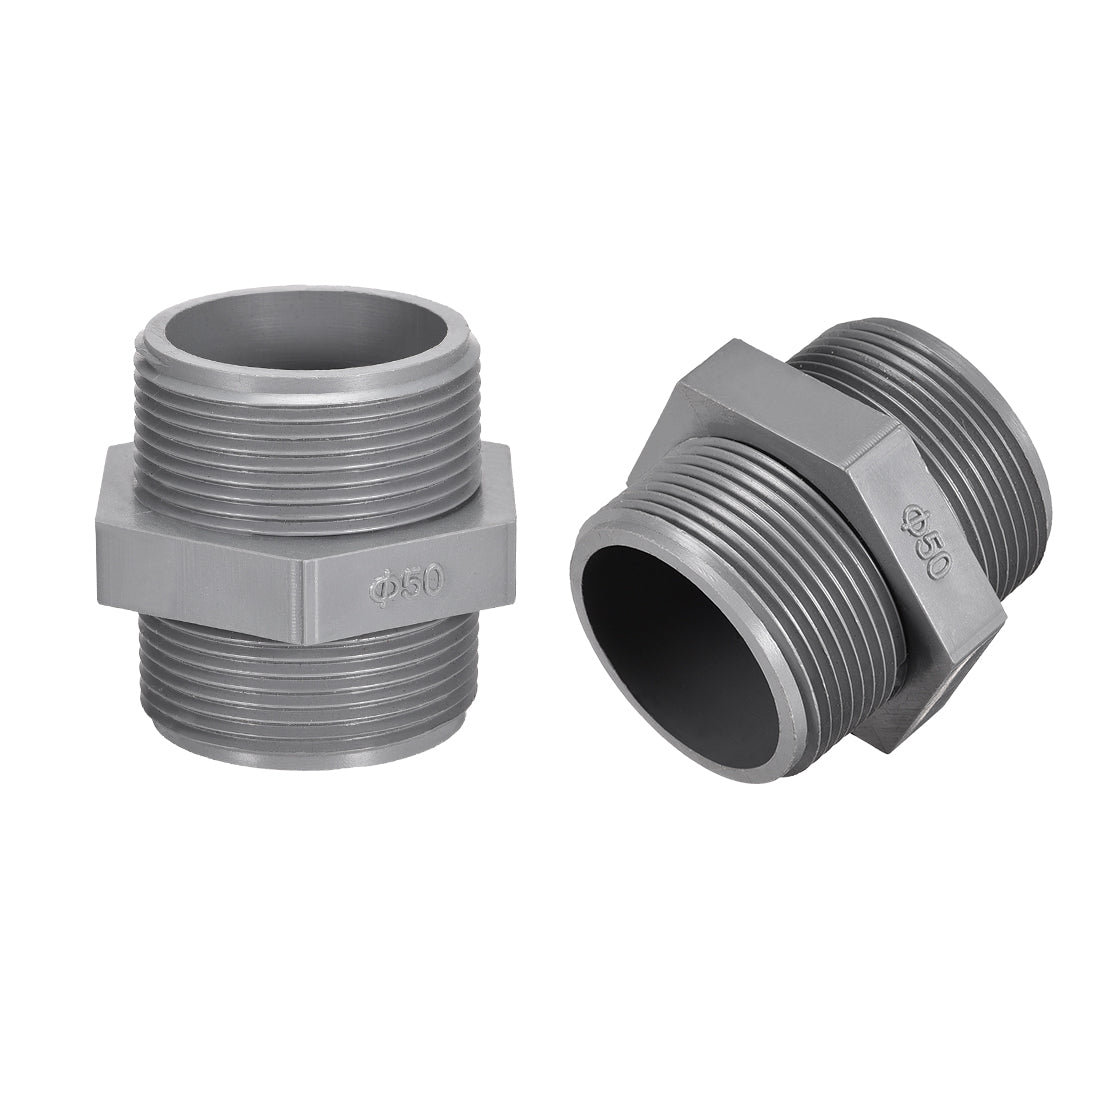 uxcell Uxcell Pipe Fittings Connector G1-1/2 Male Thread Adapter Plastic Hex Connector 6pcs